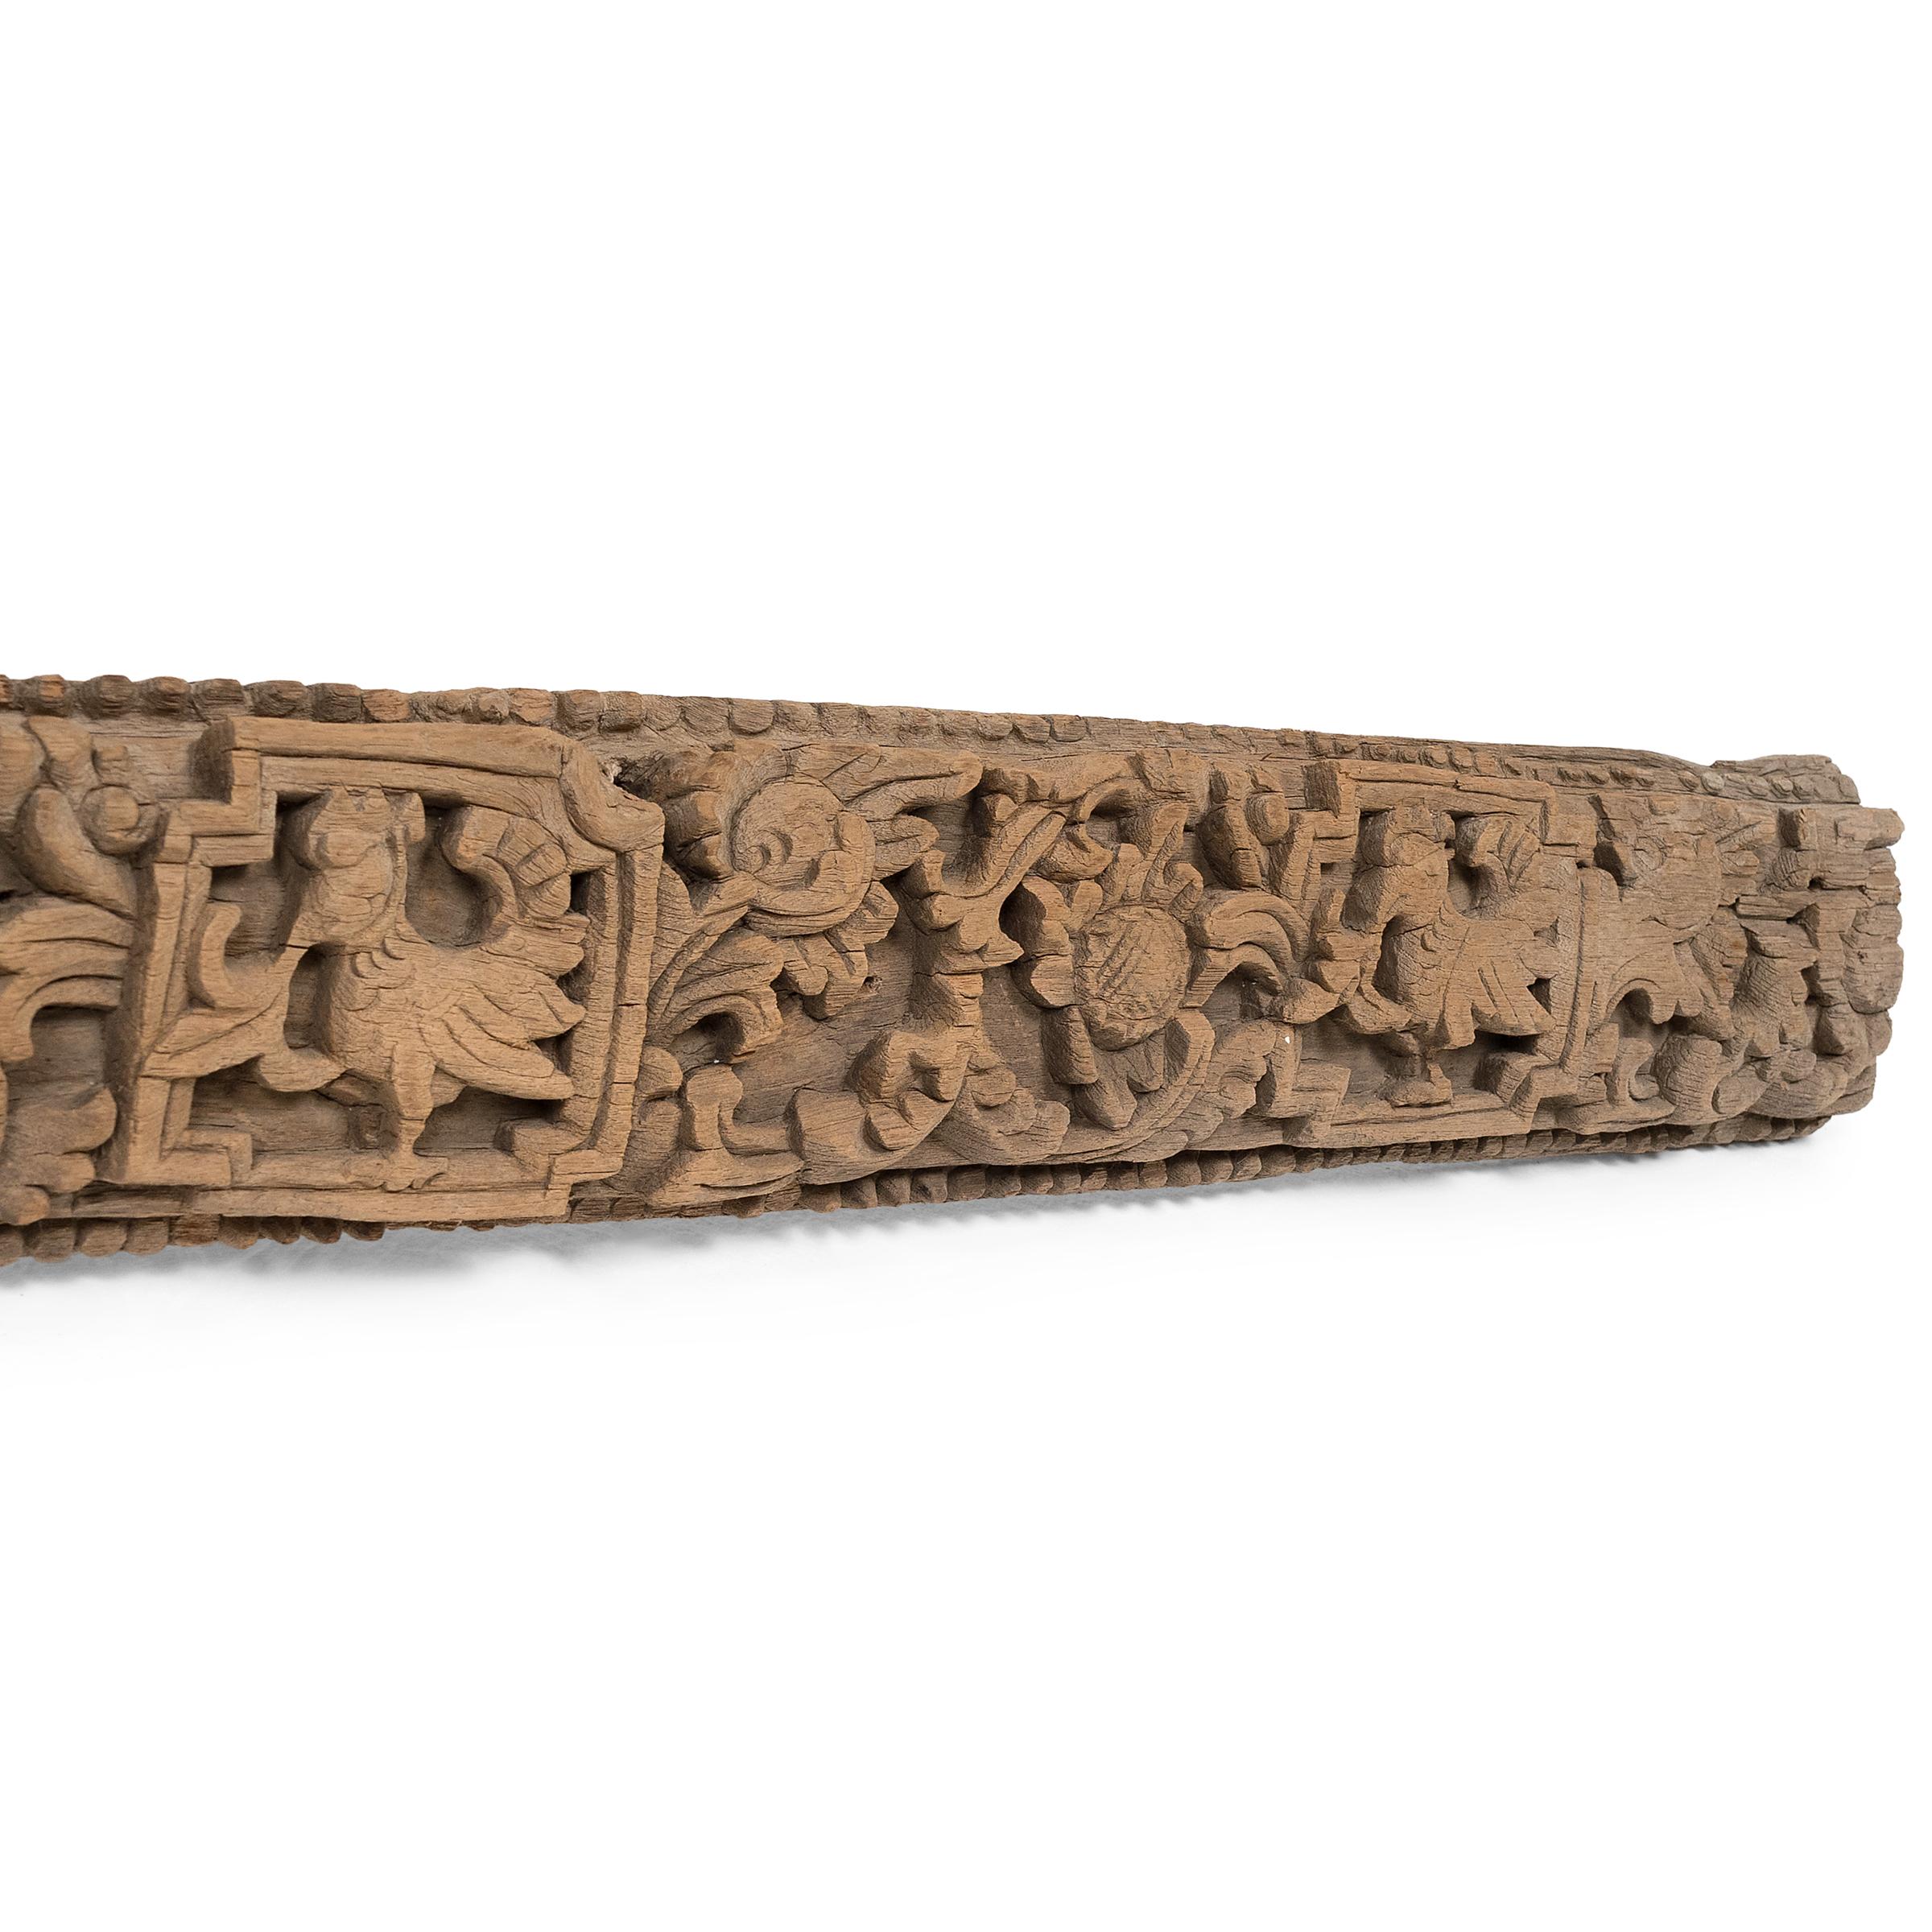 This teakwood lintel from 19th-century Burmese architecture is beautifully carved in relief with alternating patterns of birds, flowers and fruits. An architectural lintel is a horizontal beam placed over doors or windows in traditional Asian